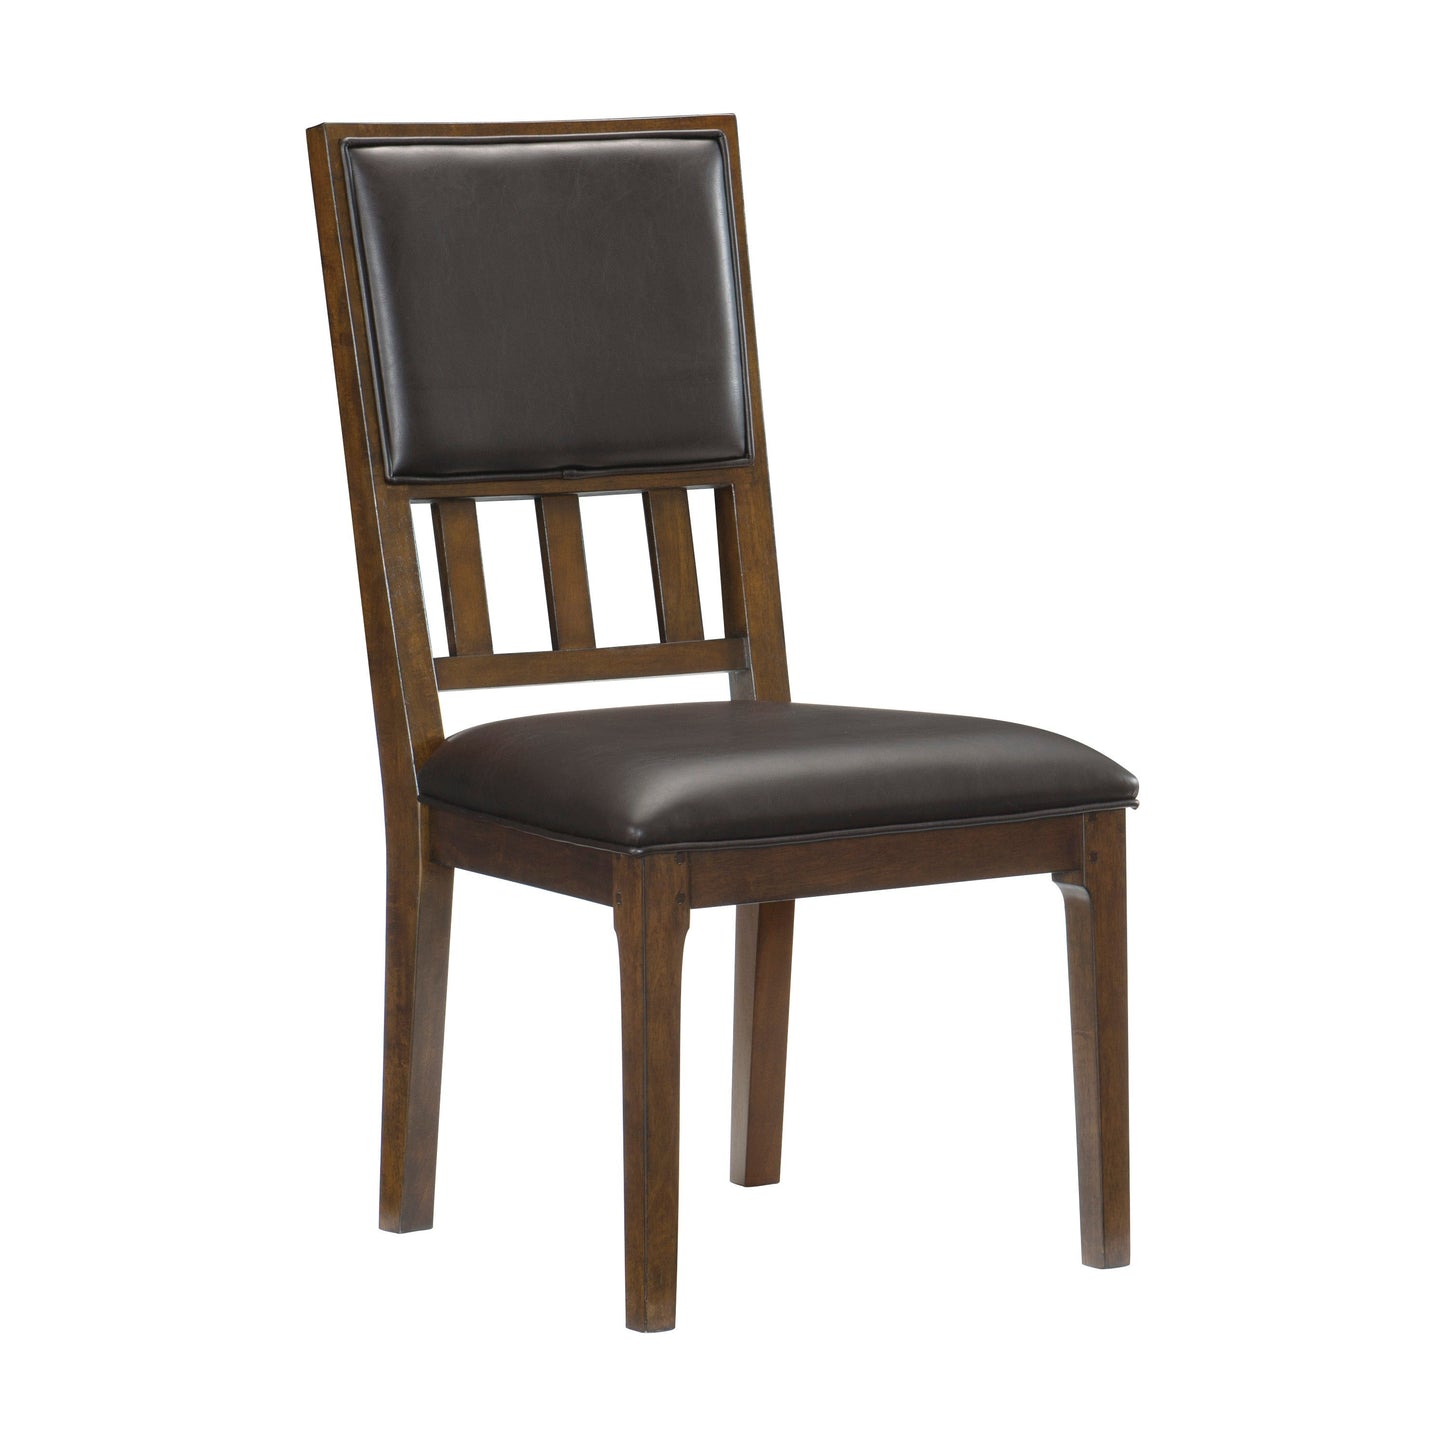 Frazier Park Brown Cherry Side Chair, Set of 2